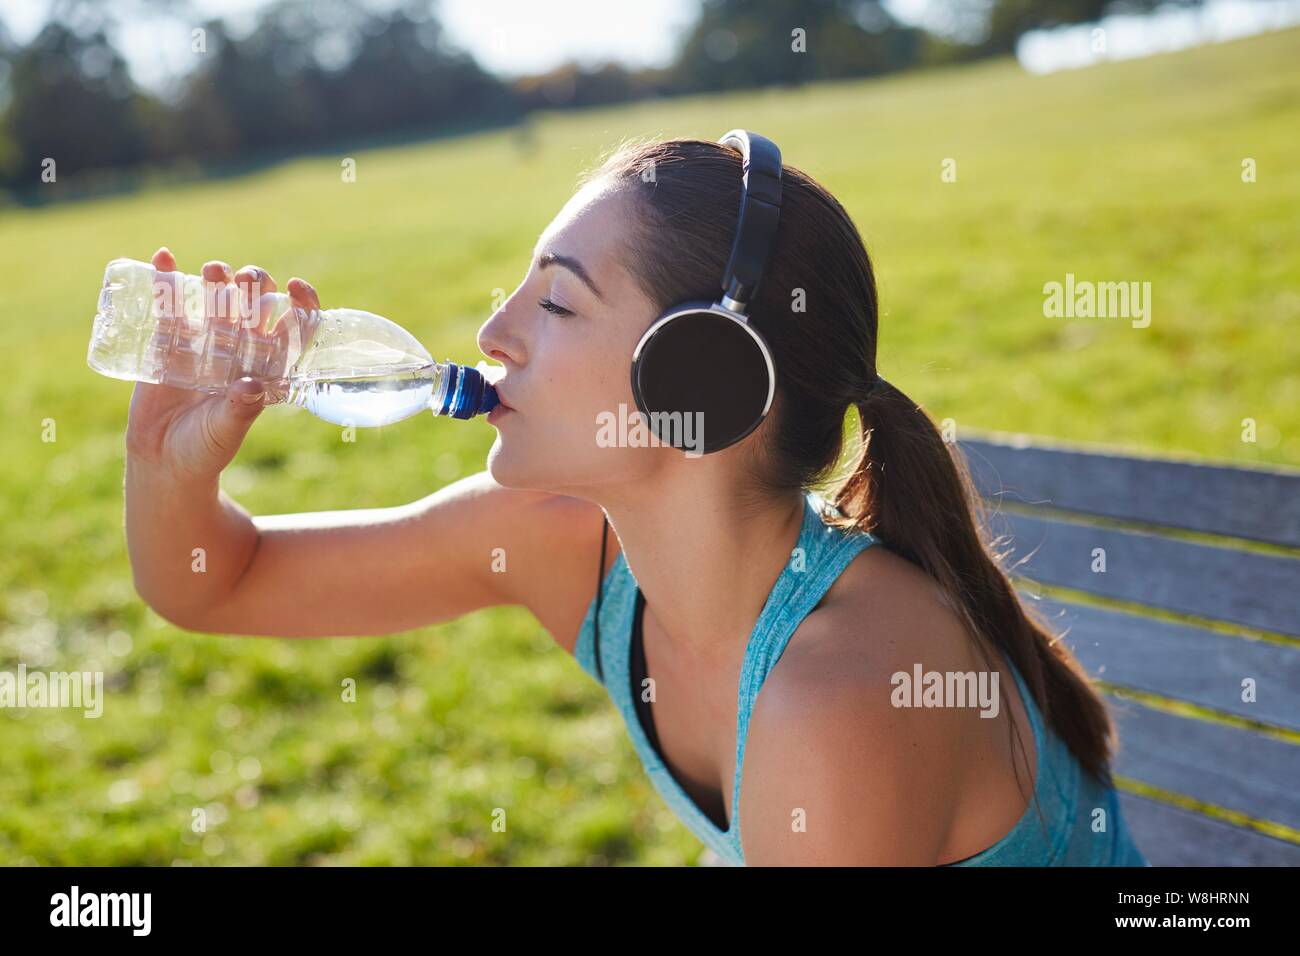 Young woman wearing headphones drinking water. Stock Photo